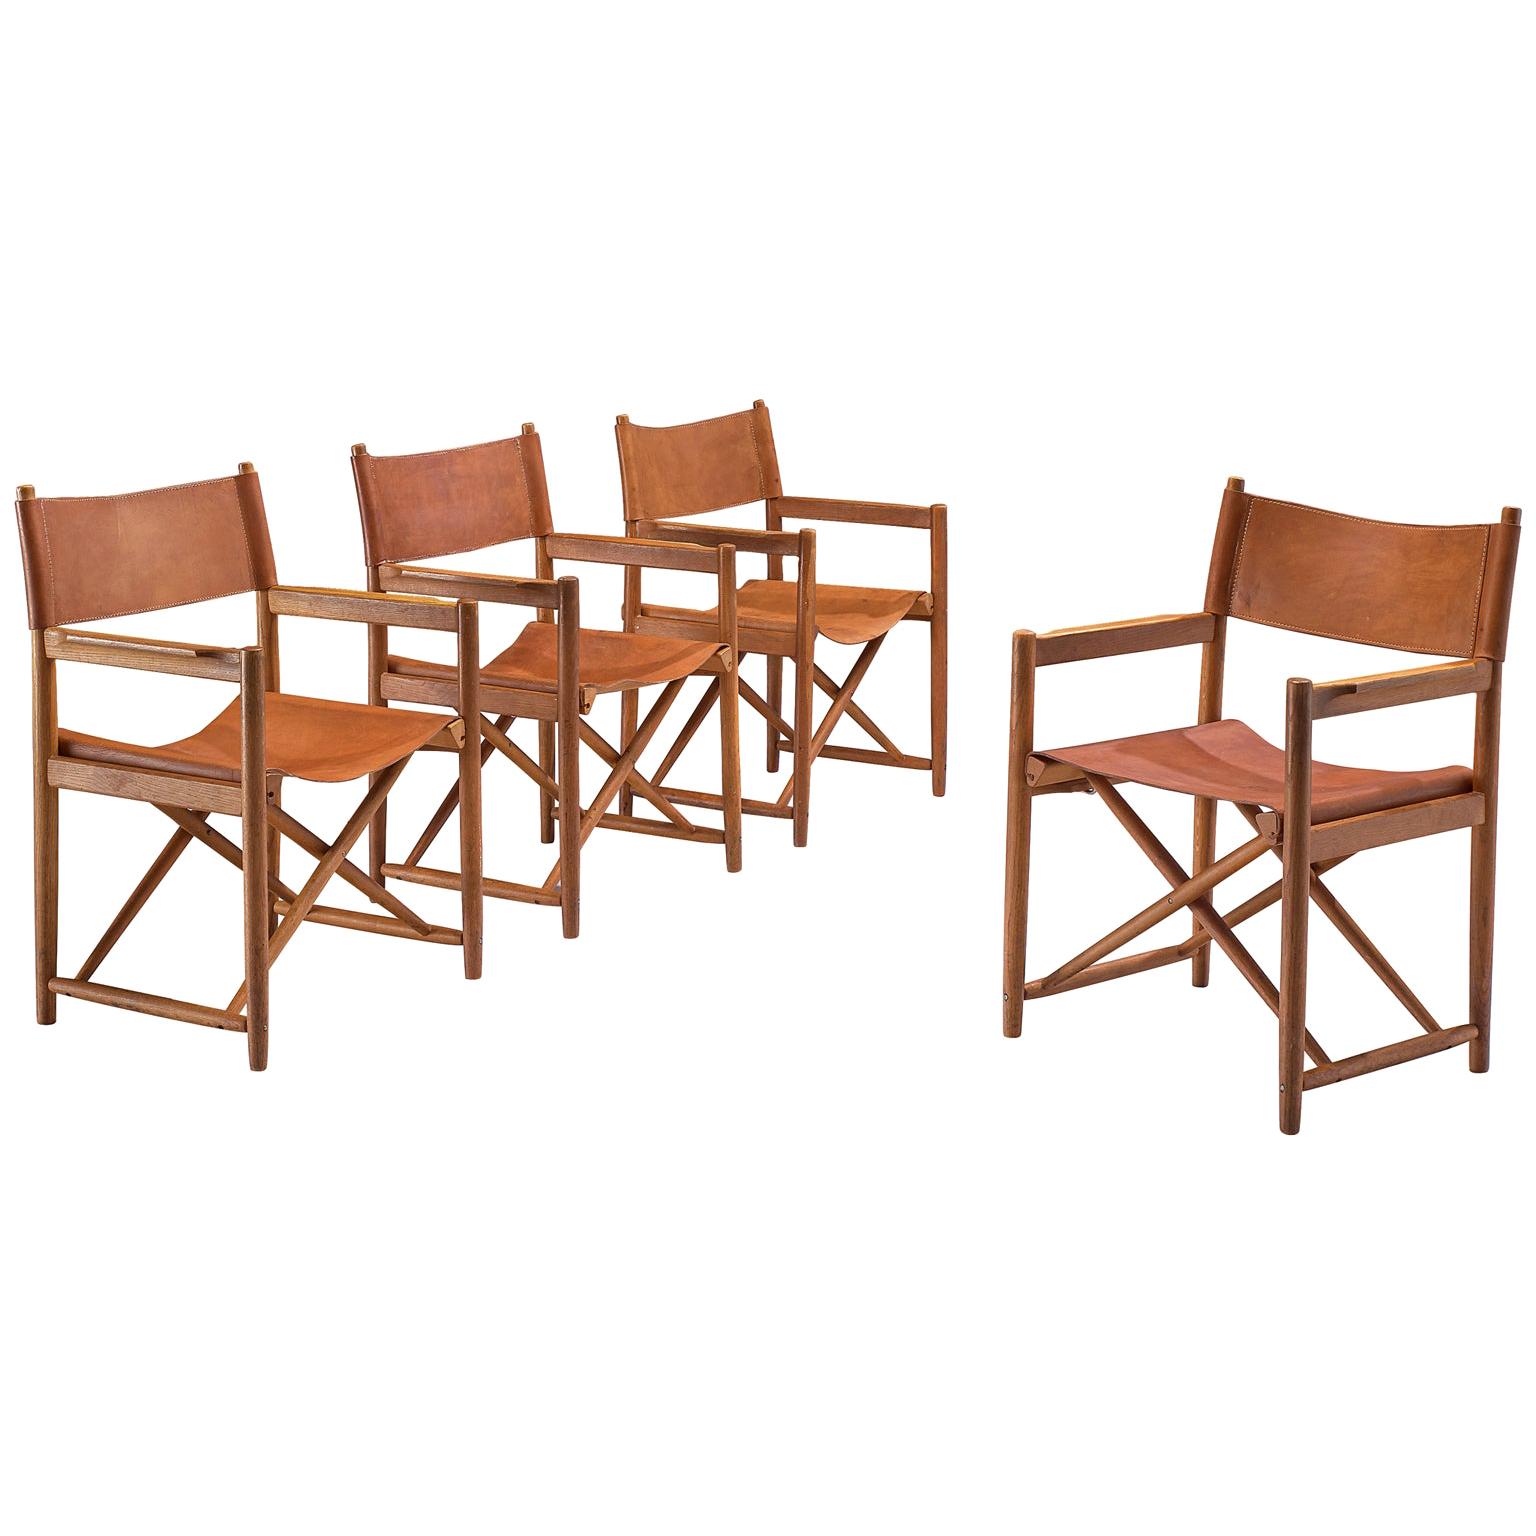 Danish Set of Four Safari Chairs in Cognac Leather and Oak